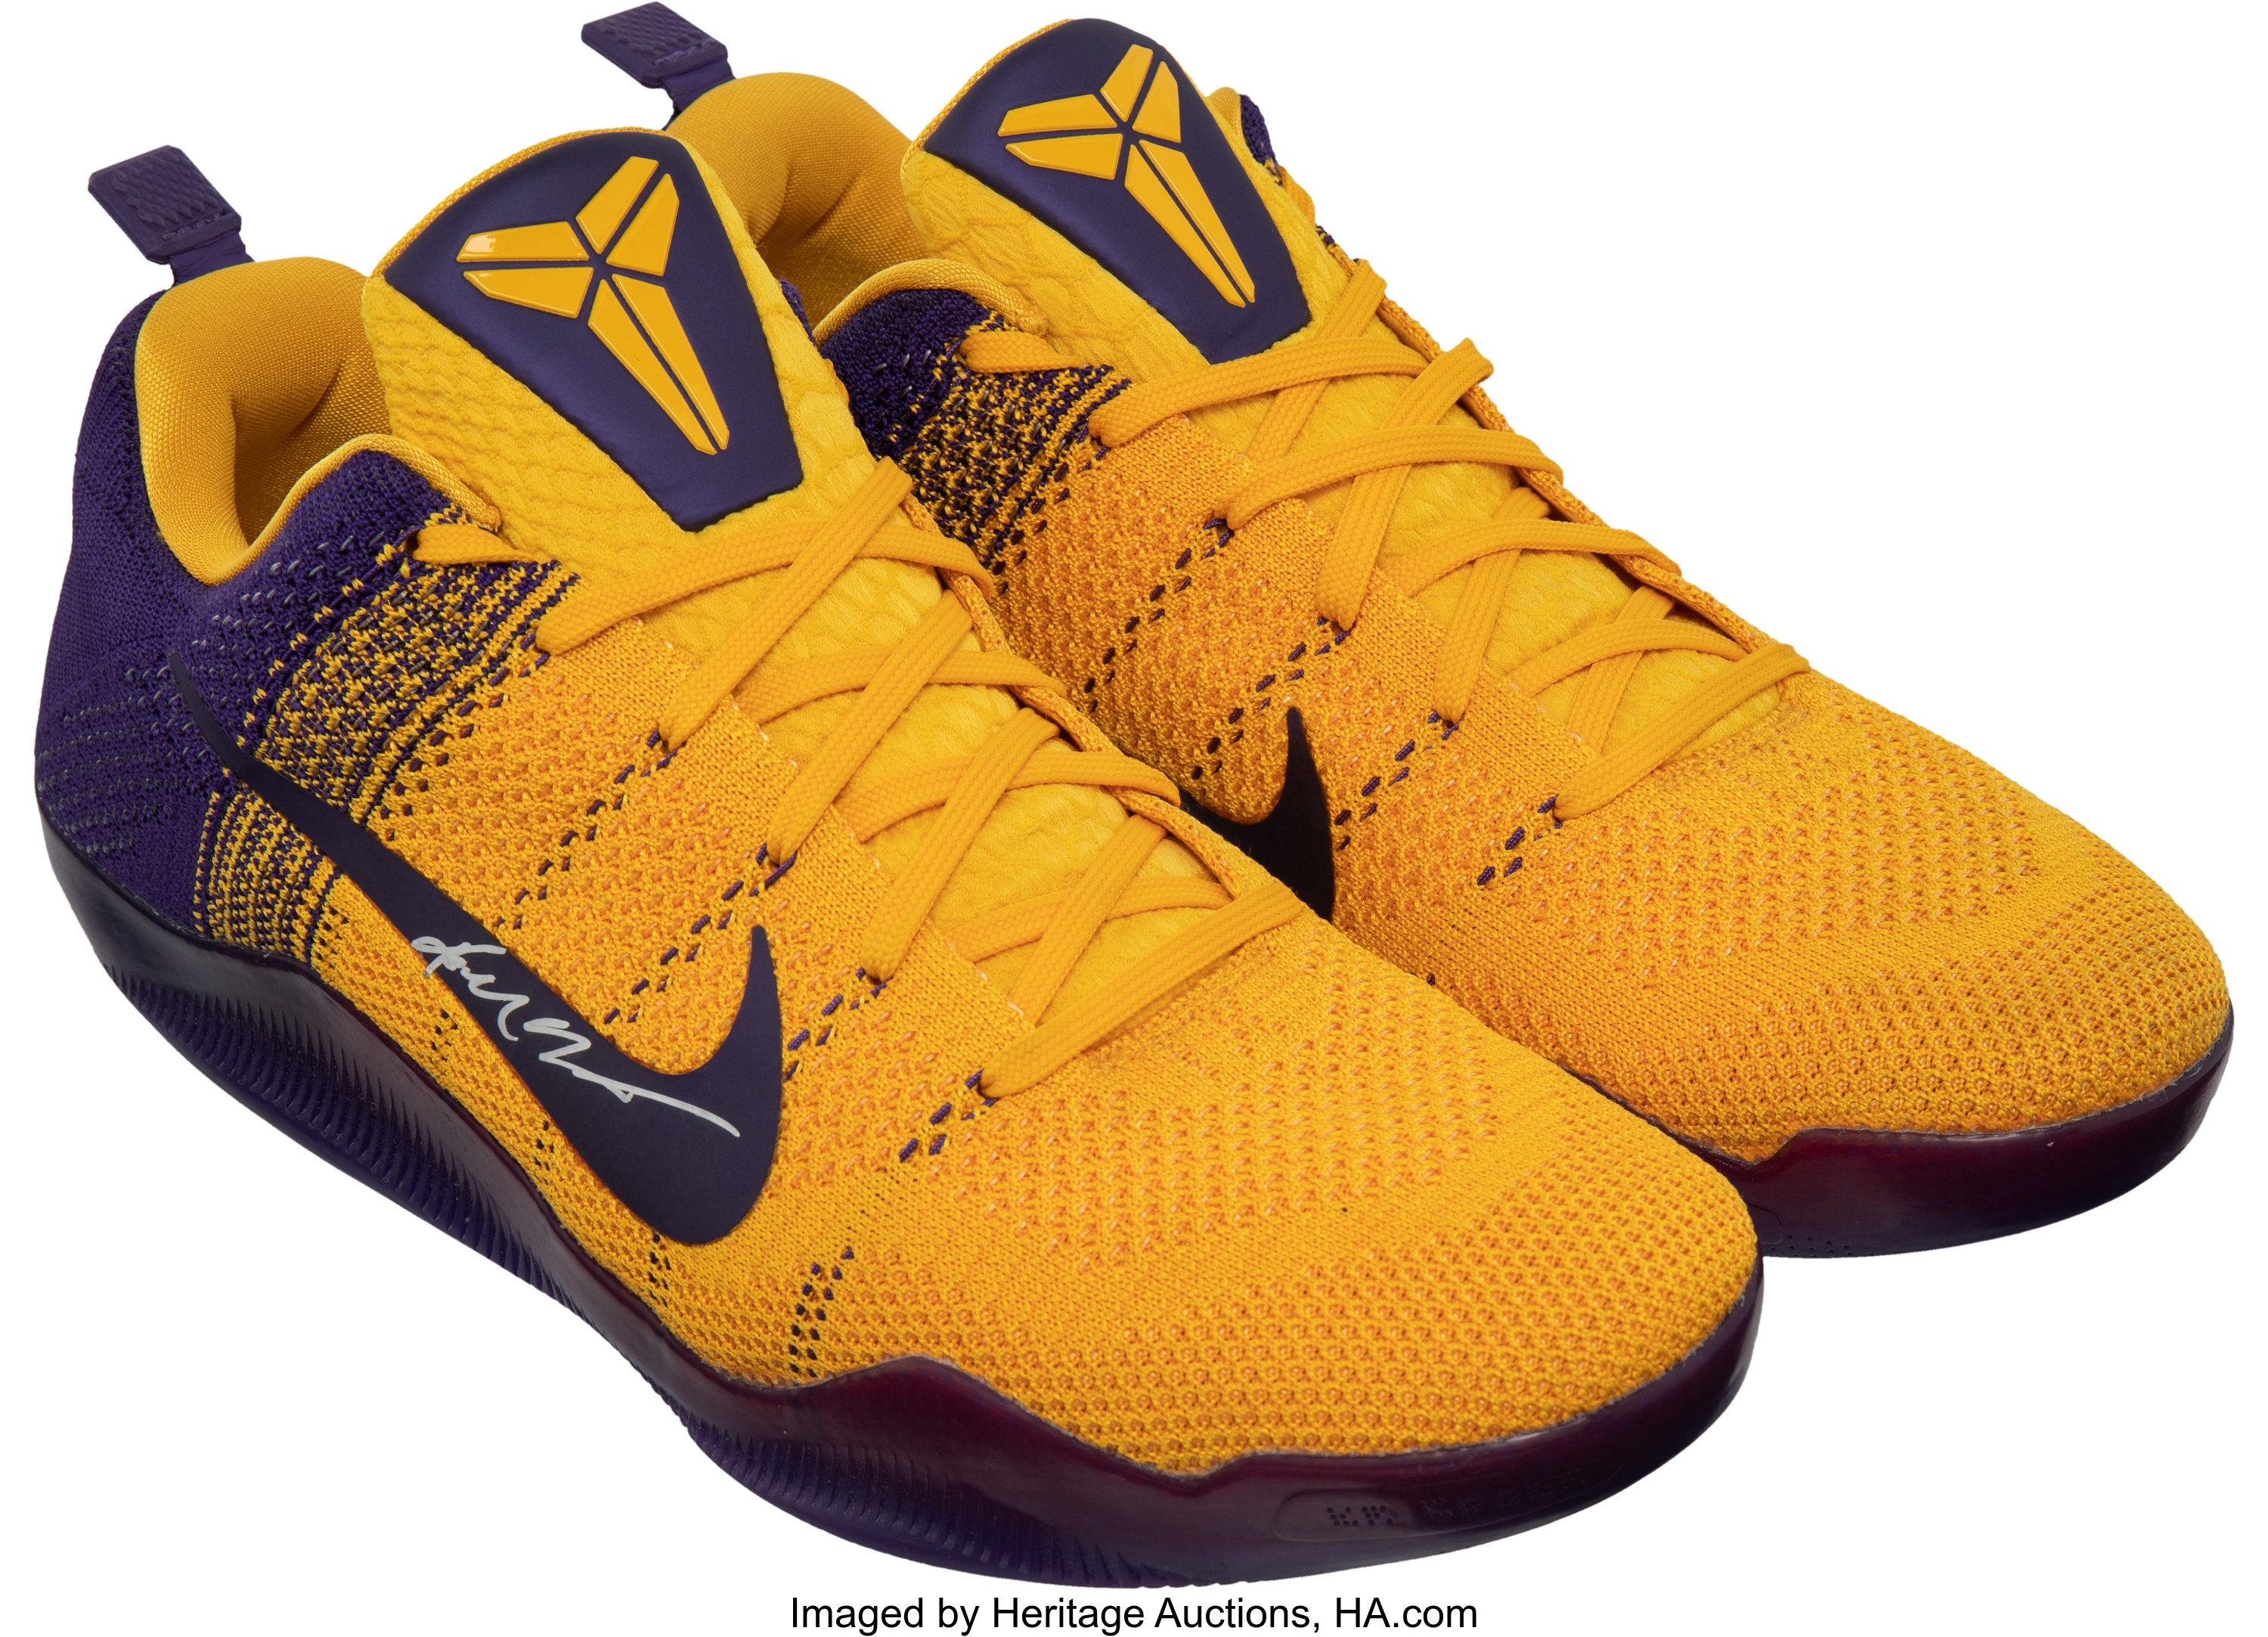 Sell or Auction Your Original Used Kobe Bryant Game Issued Lakers